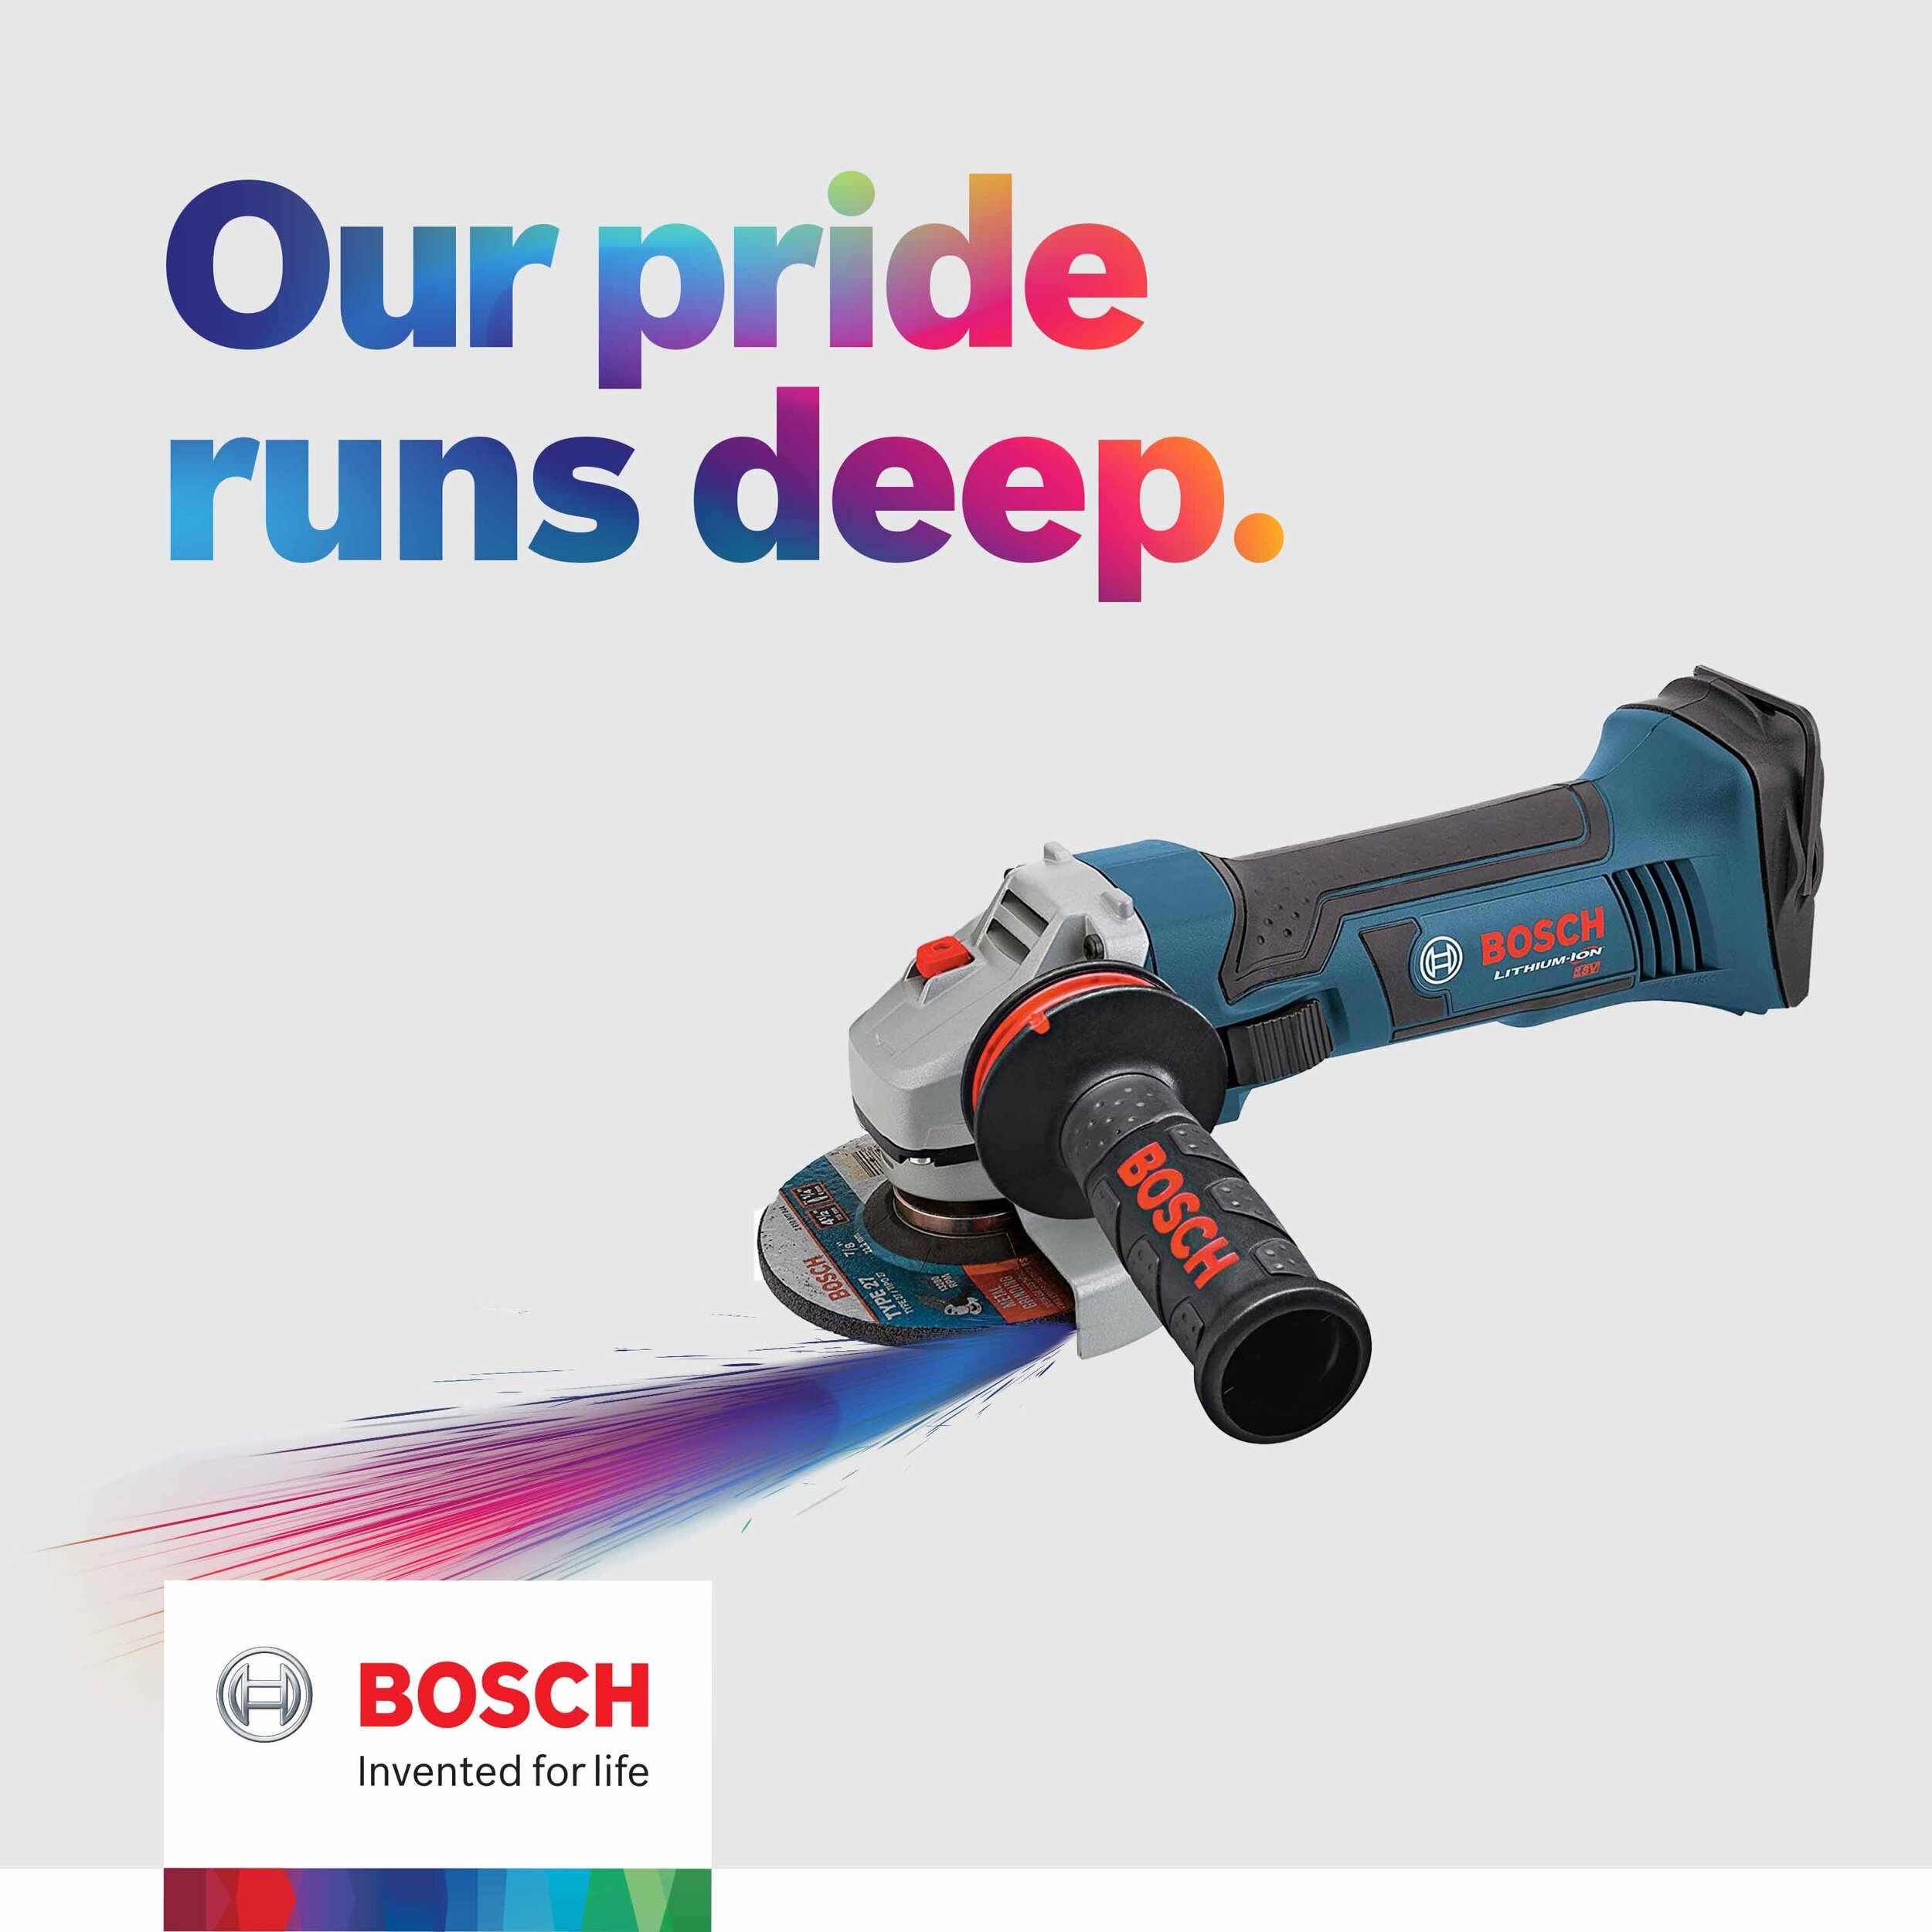 Bosch-Pride-Month-with-Angle-grinder.jpg